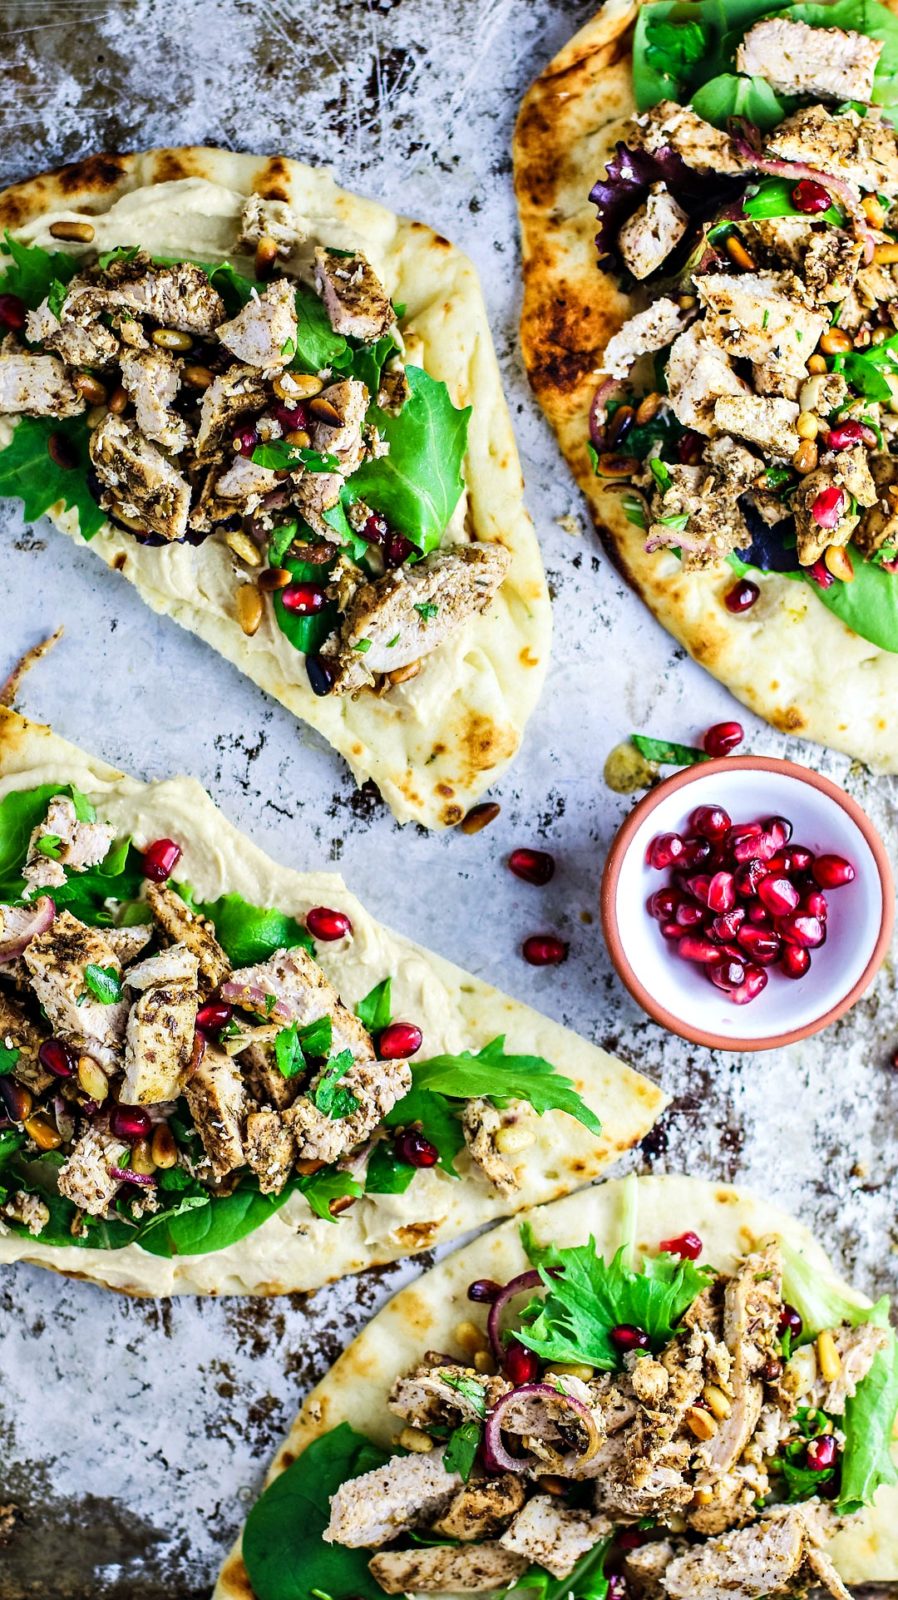 Naan breads topped with hummus, chicken, and greens.